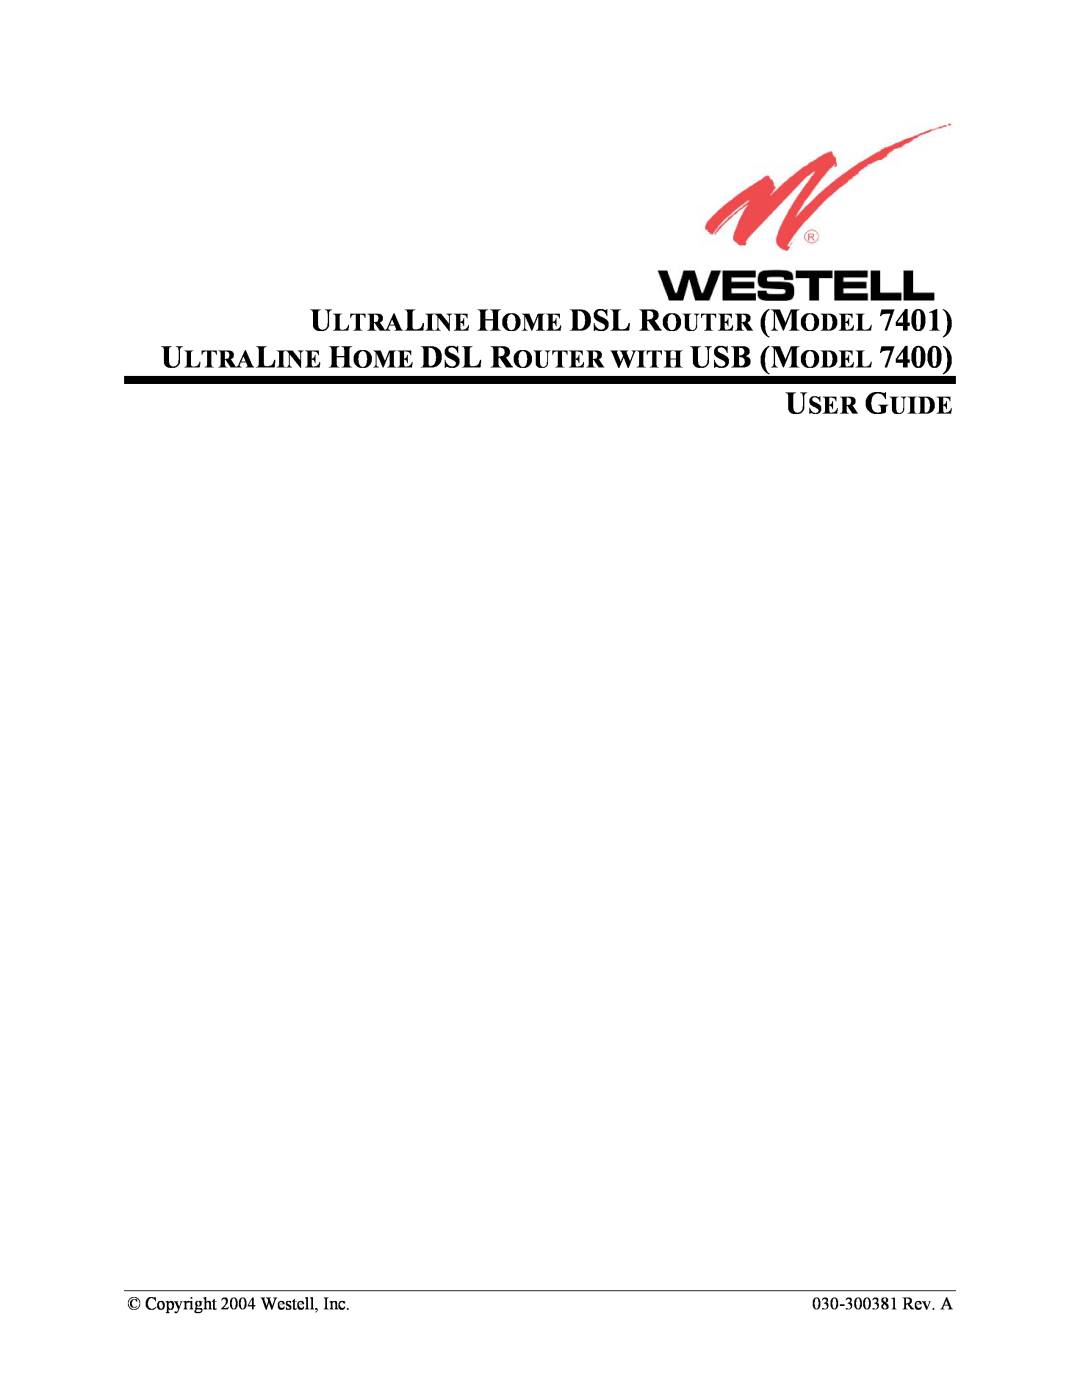 Westell Technologies 7400, 7401 manual User Guide, Copyright 2004 Westell, Inc, 030-300381 Rev. A 